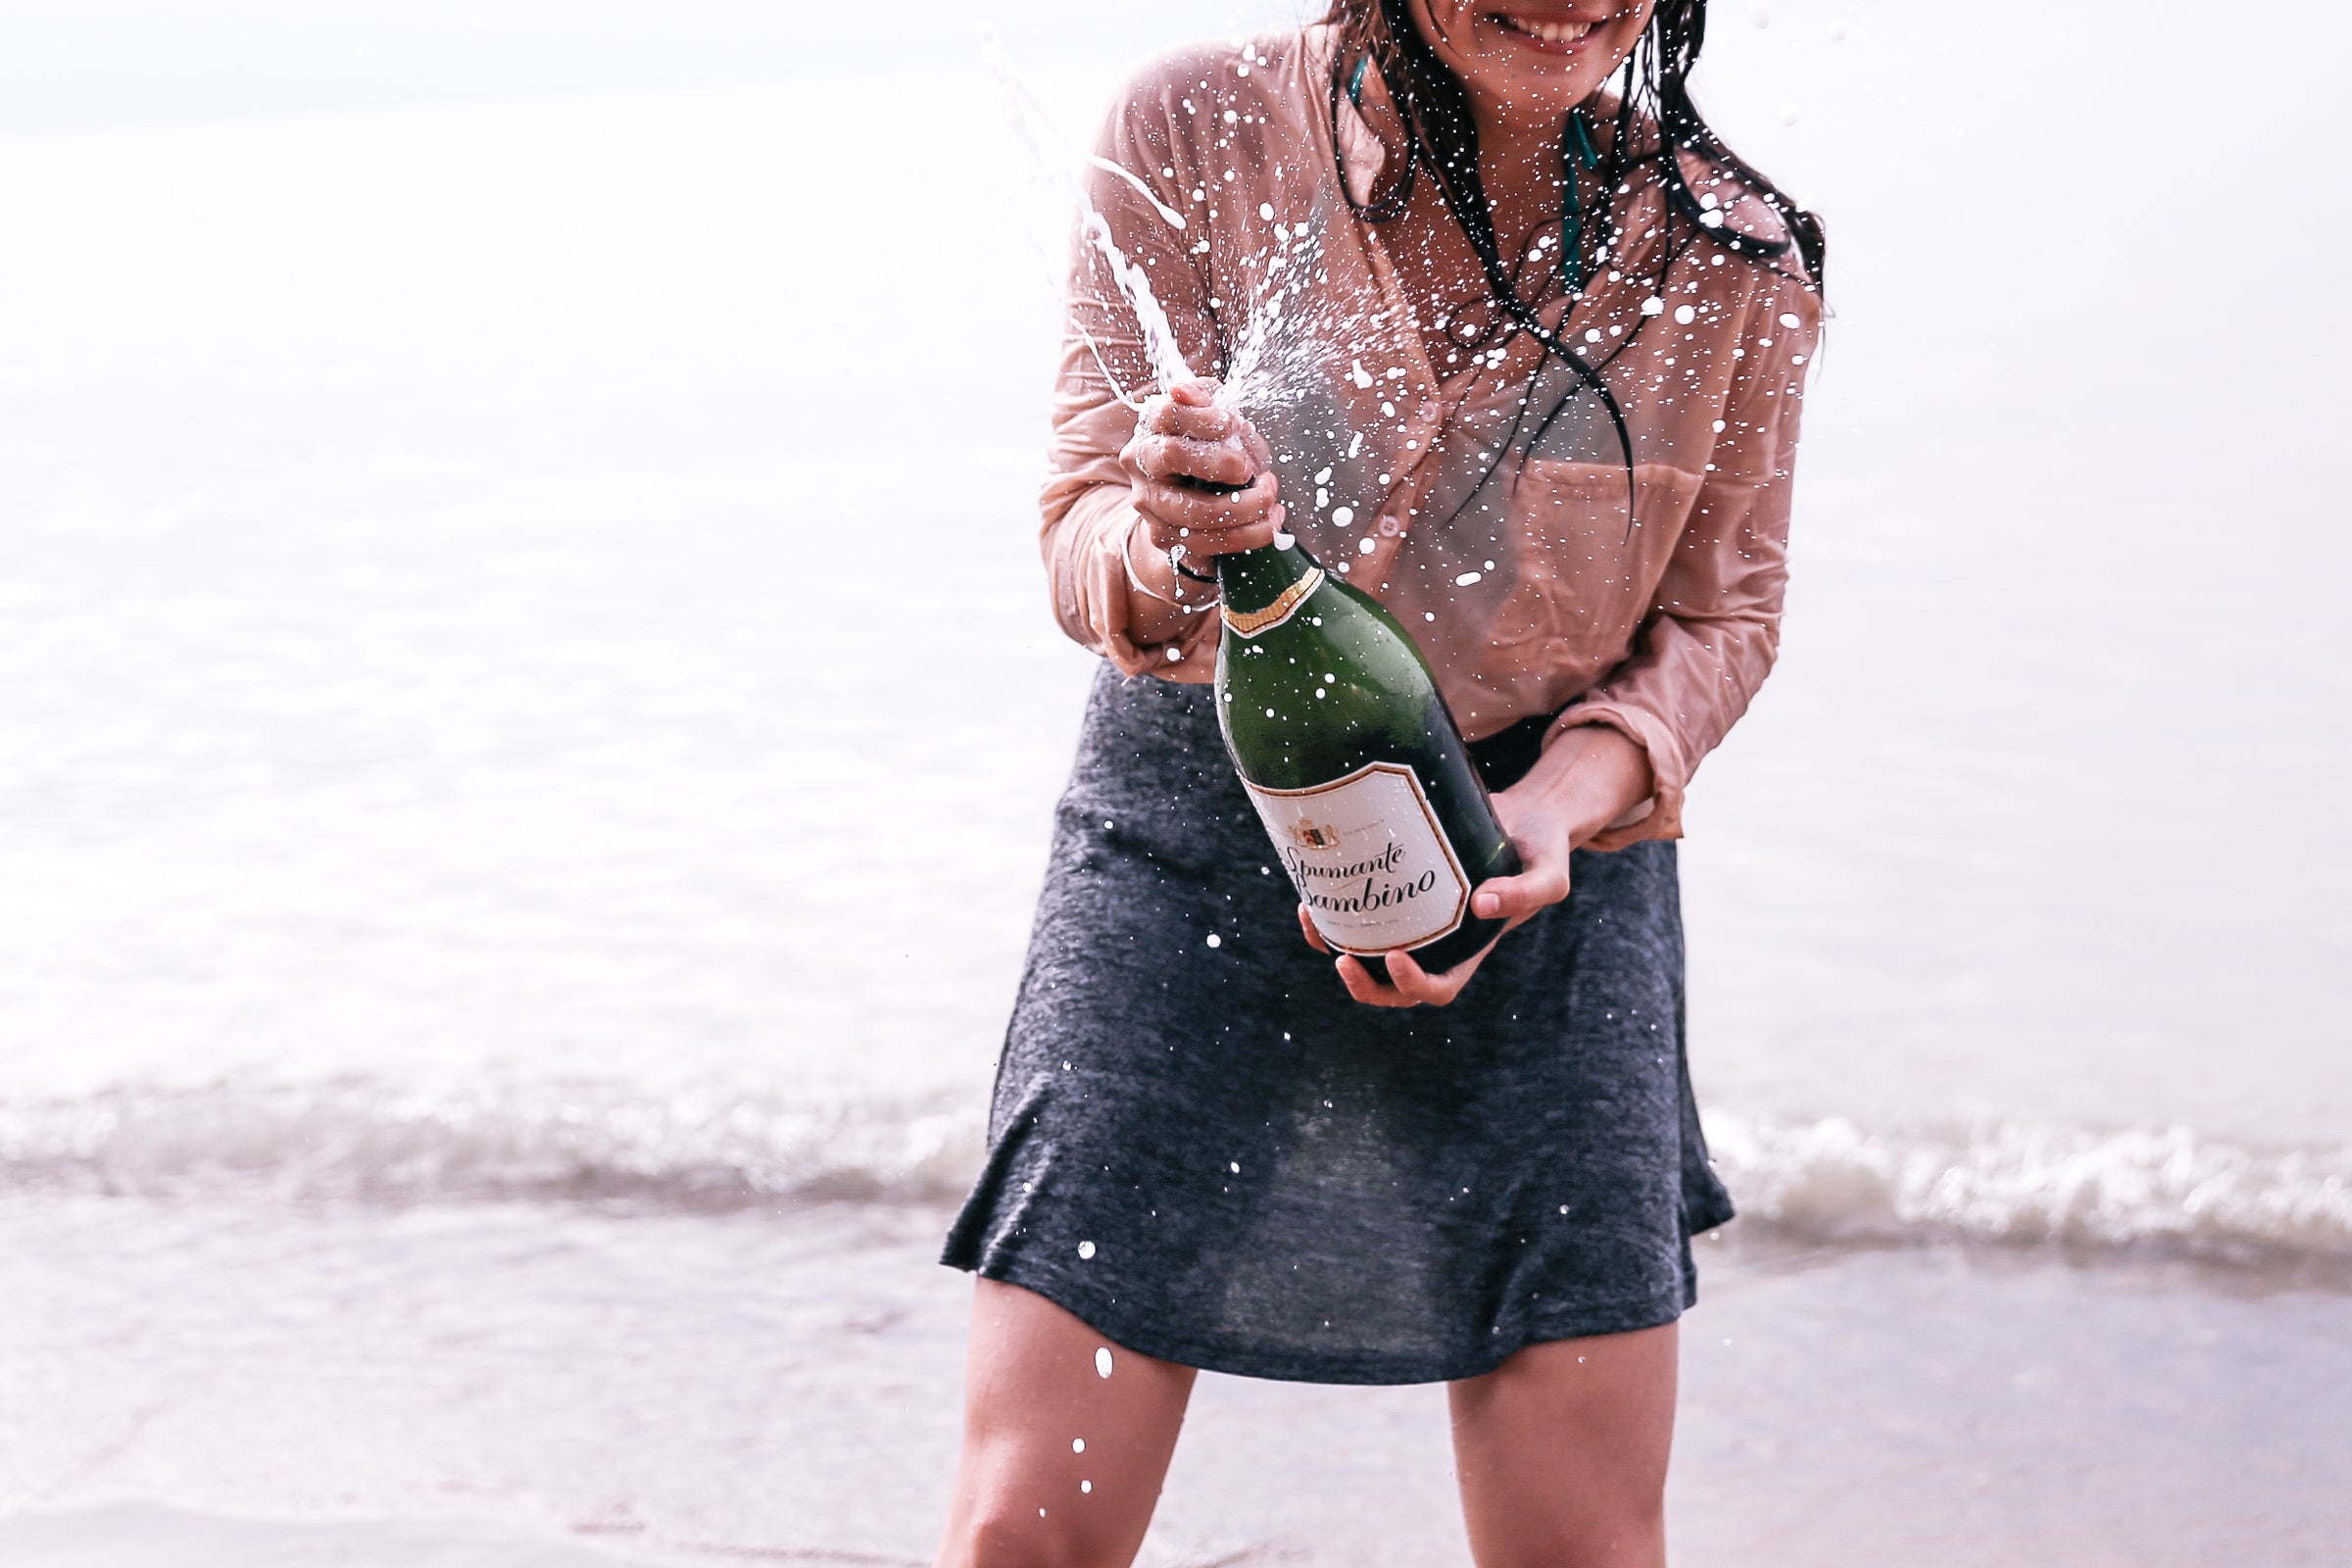 Wet woman at the beach with champagne